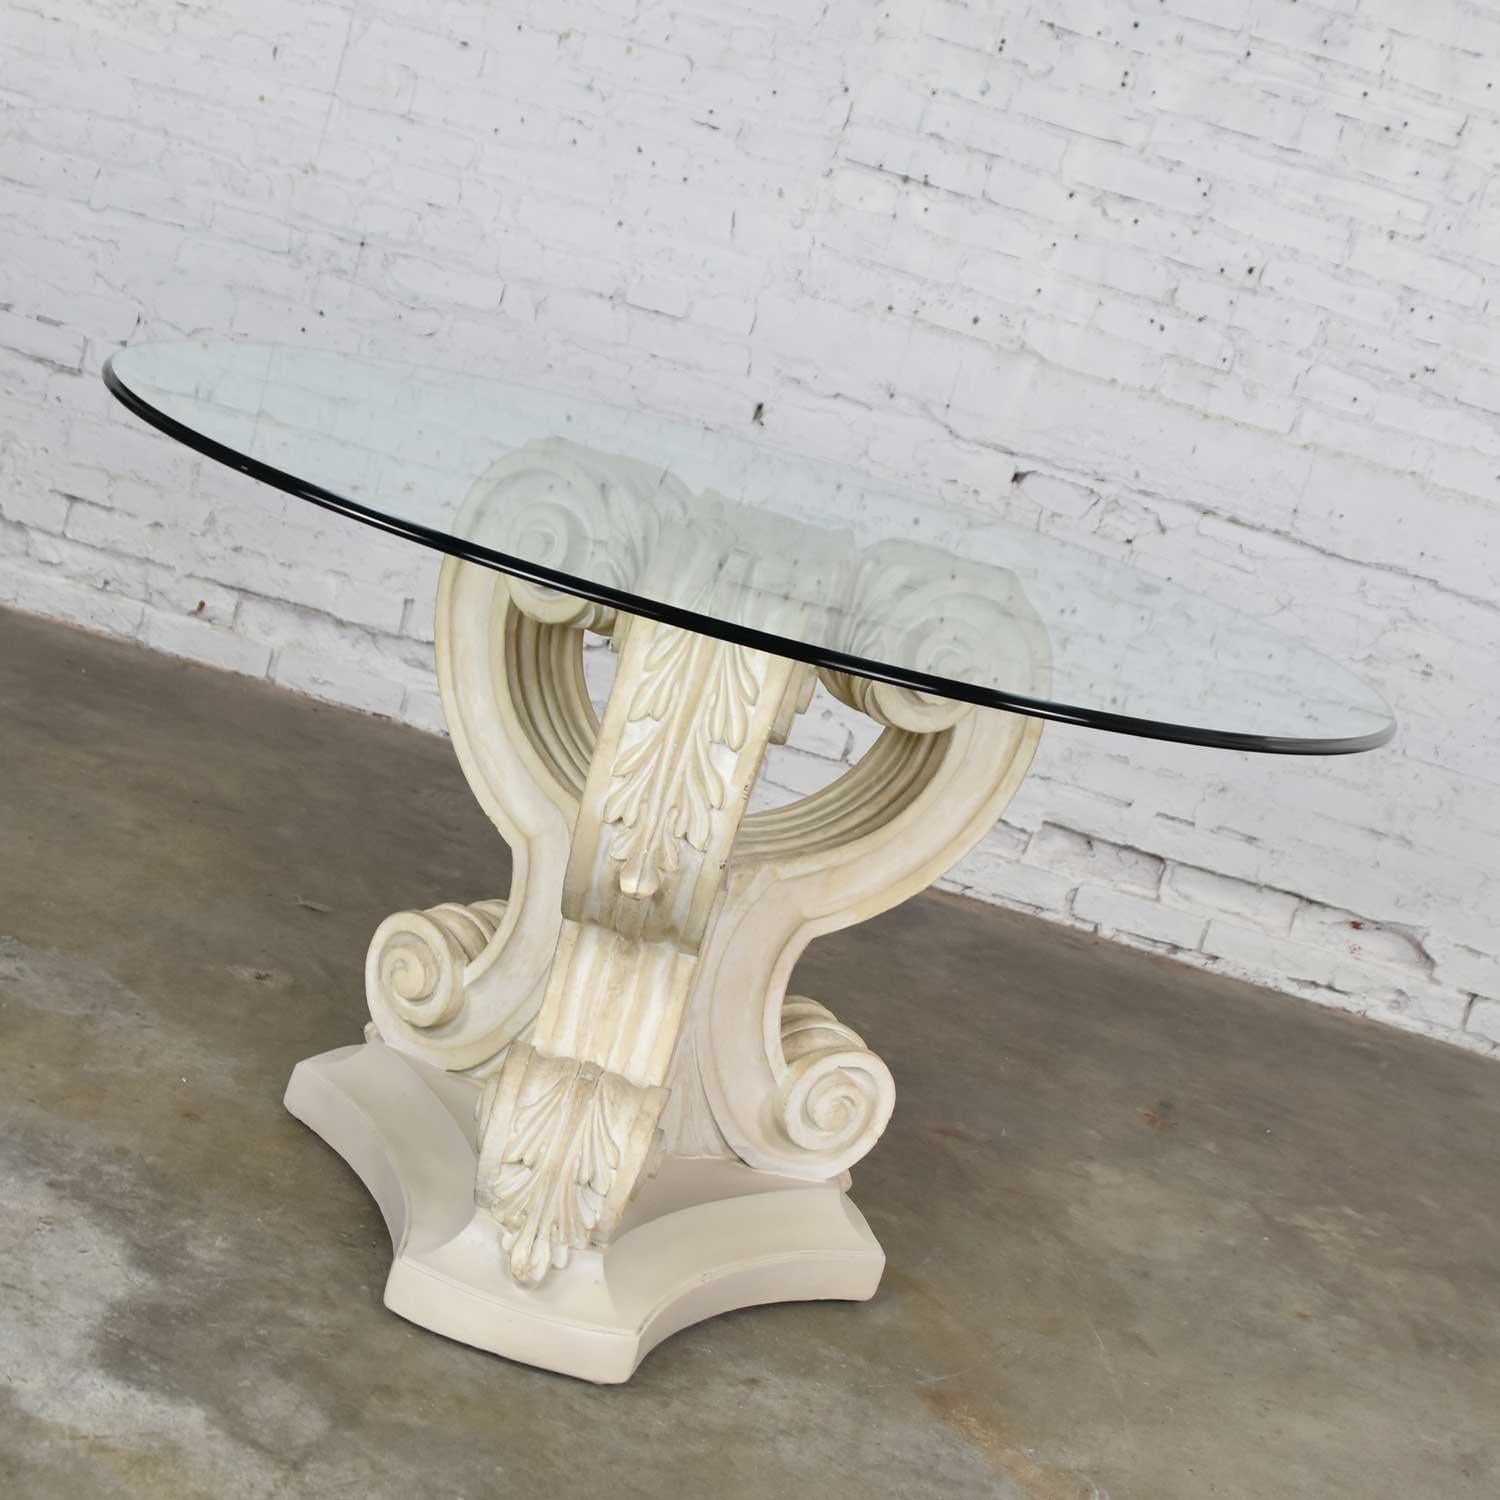 Gorgeous neoclassical style architectural plaster pedestal base dining table or center table with a 48-inch round glass top with ogee edge. It is in wonderful vintage condition. There is a damaged spot on the plaster which has been restored. You